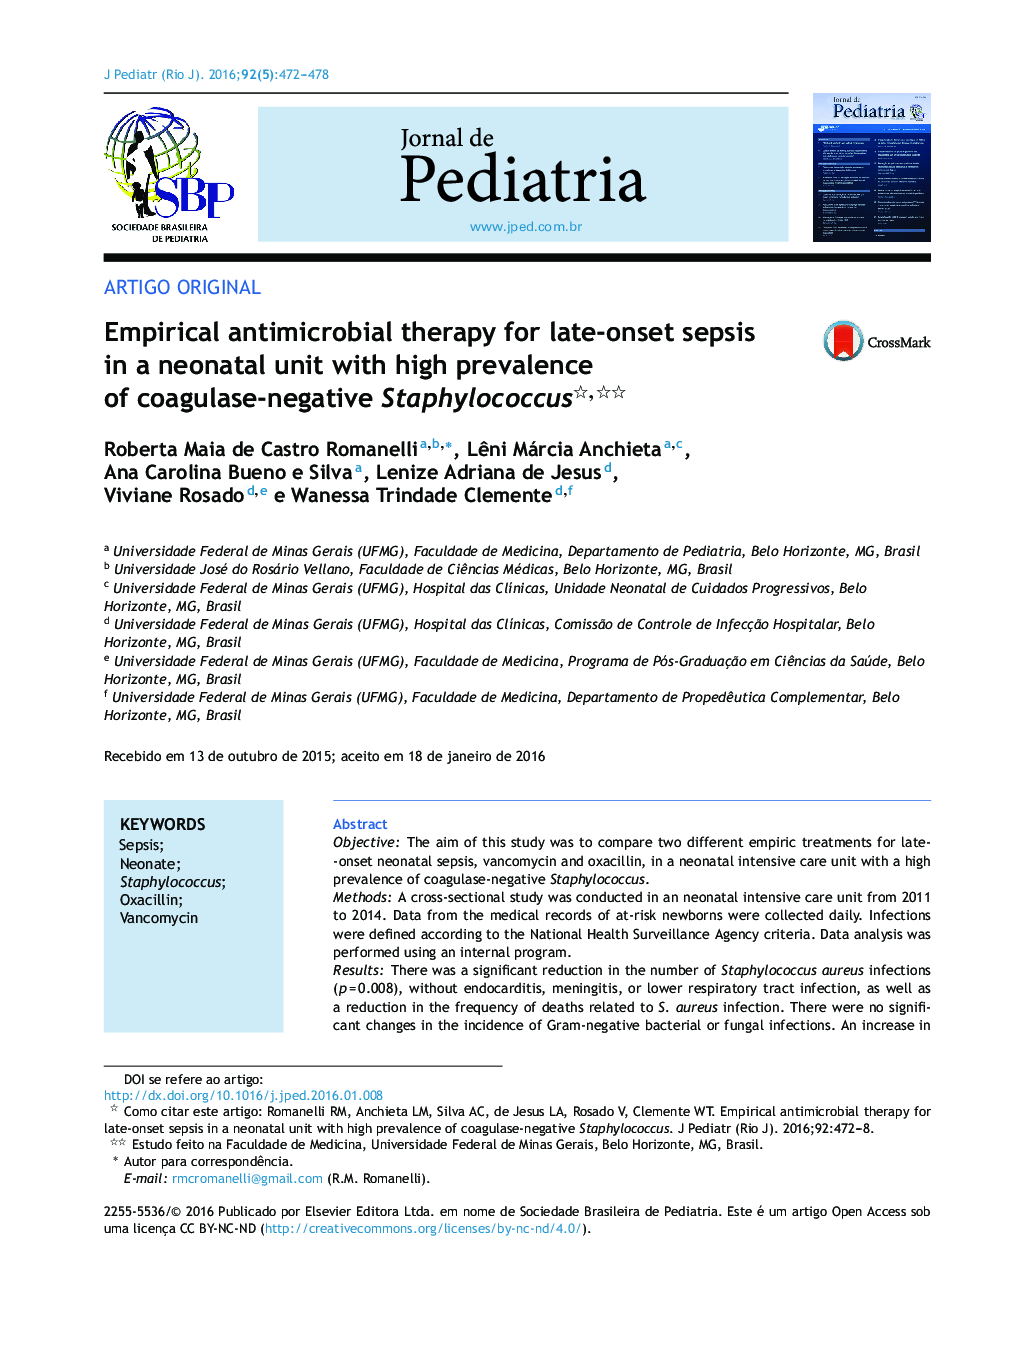 Empirical antimicrobial therapy for late‐onset sepsis in a neonatal unit with high prevalence of coagulase‐negative Staphylococcus 